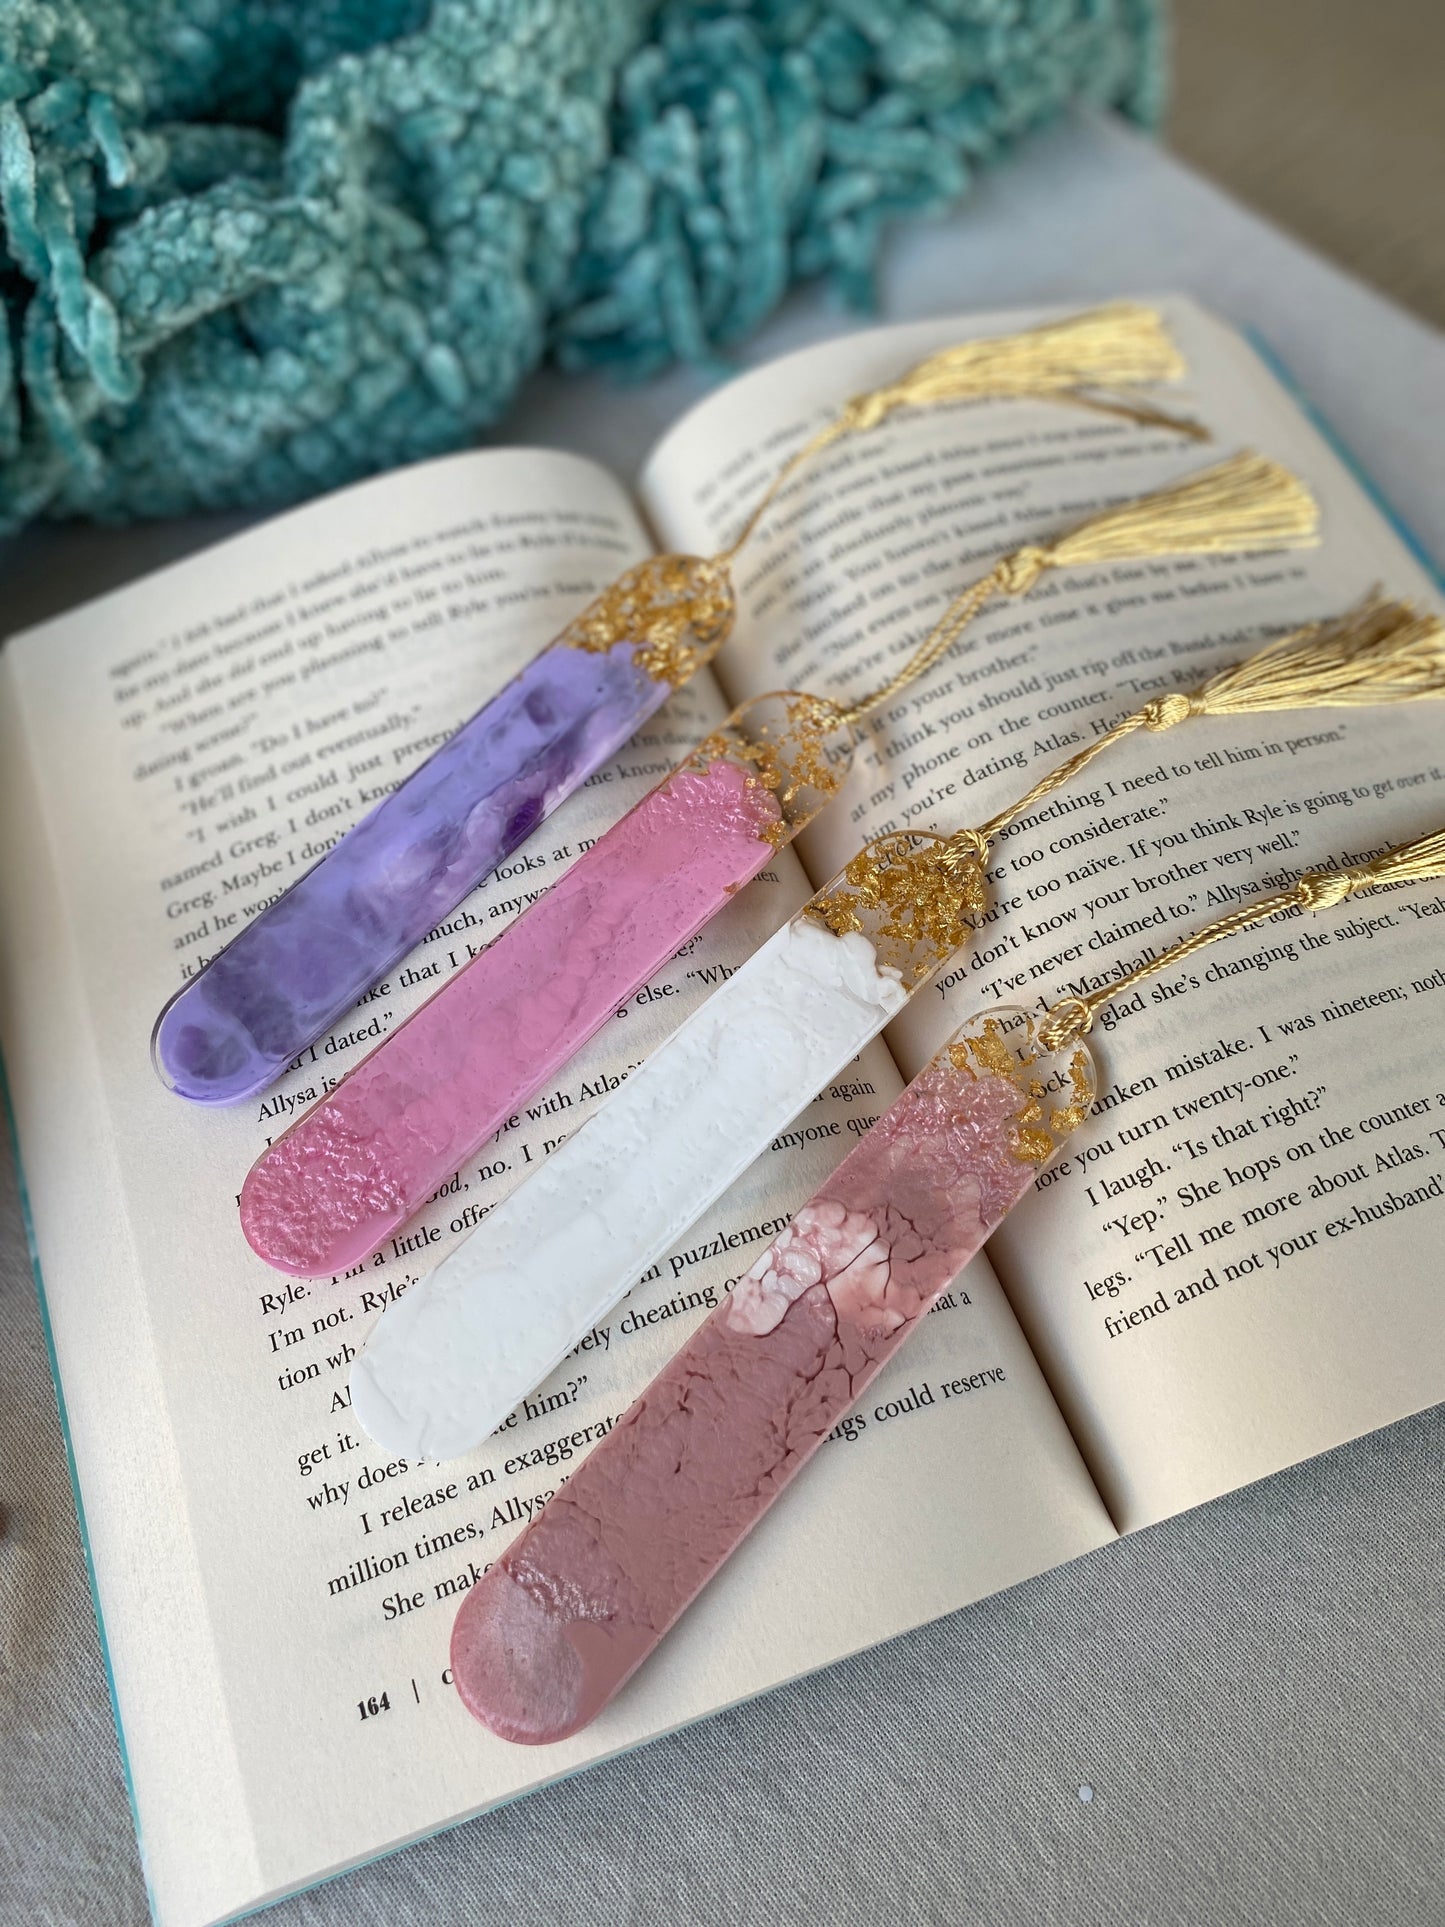 BOOKMARK - created in Barbie pink resin with gold flakes